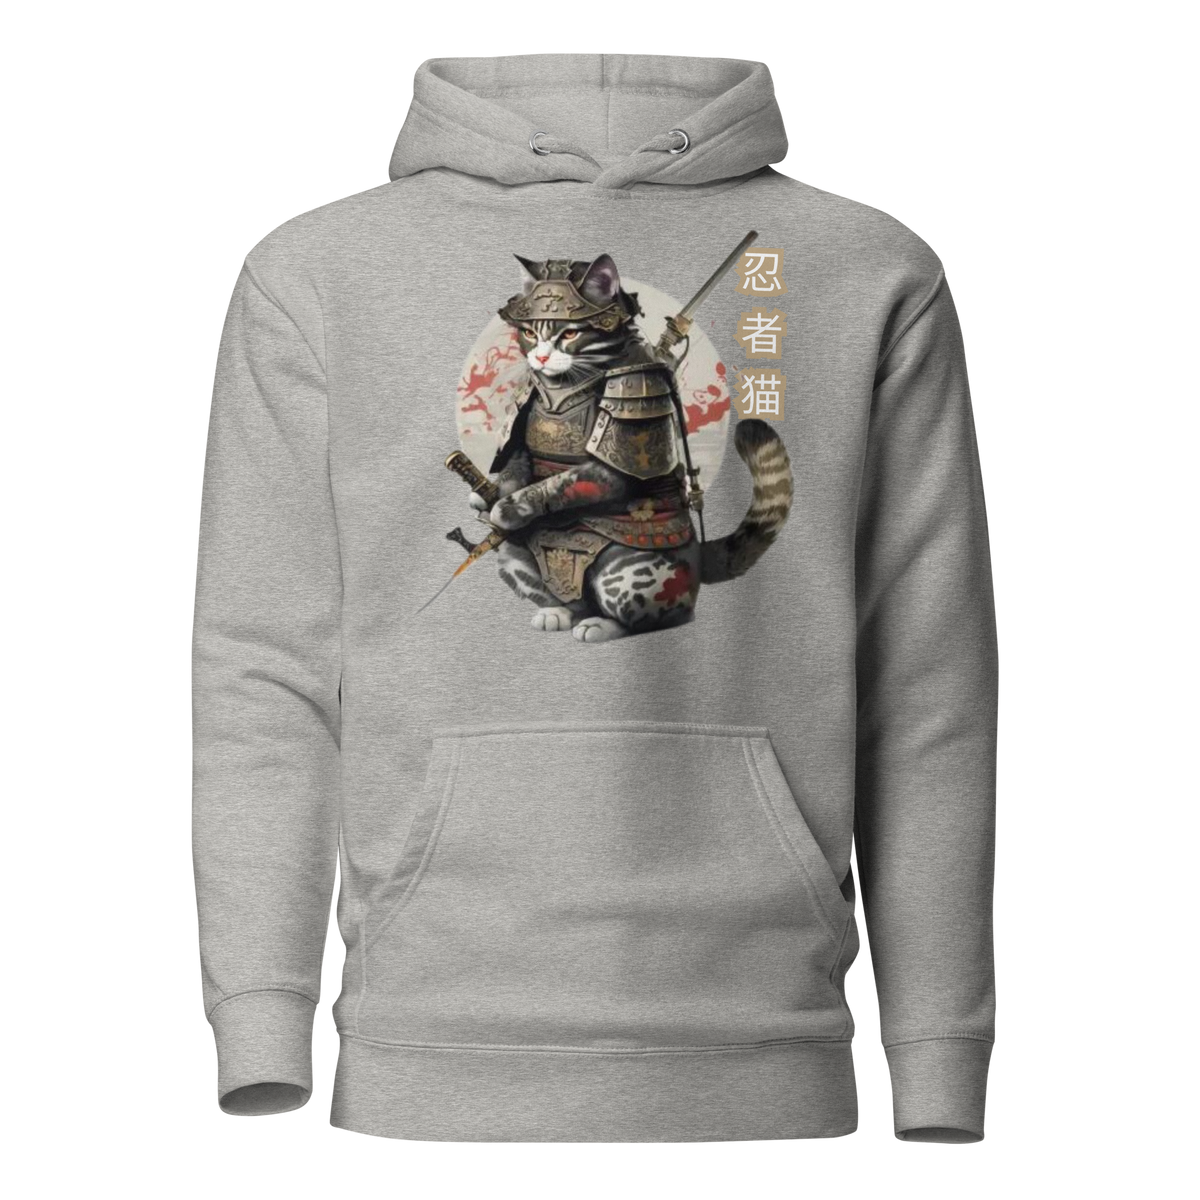 Carbon Grey Color- Tokio Japan,  Samurai cat hoodie,  Samurai Cat, Tattoo Style hoodie,  Samurai cat,  Samurai,  Ninja, Samurai Kitten,  Ninja cat hoodie,  Ninja Cat,  kawaii,  Japanese Kawaii, Ninja Cat hoodie,  Japanese Calligraphy,  gift for him,  gift for her,  gift for cat lover,  Cat Lover hoodie